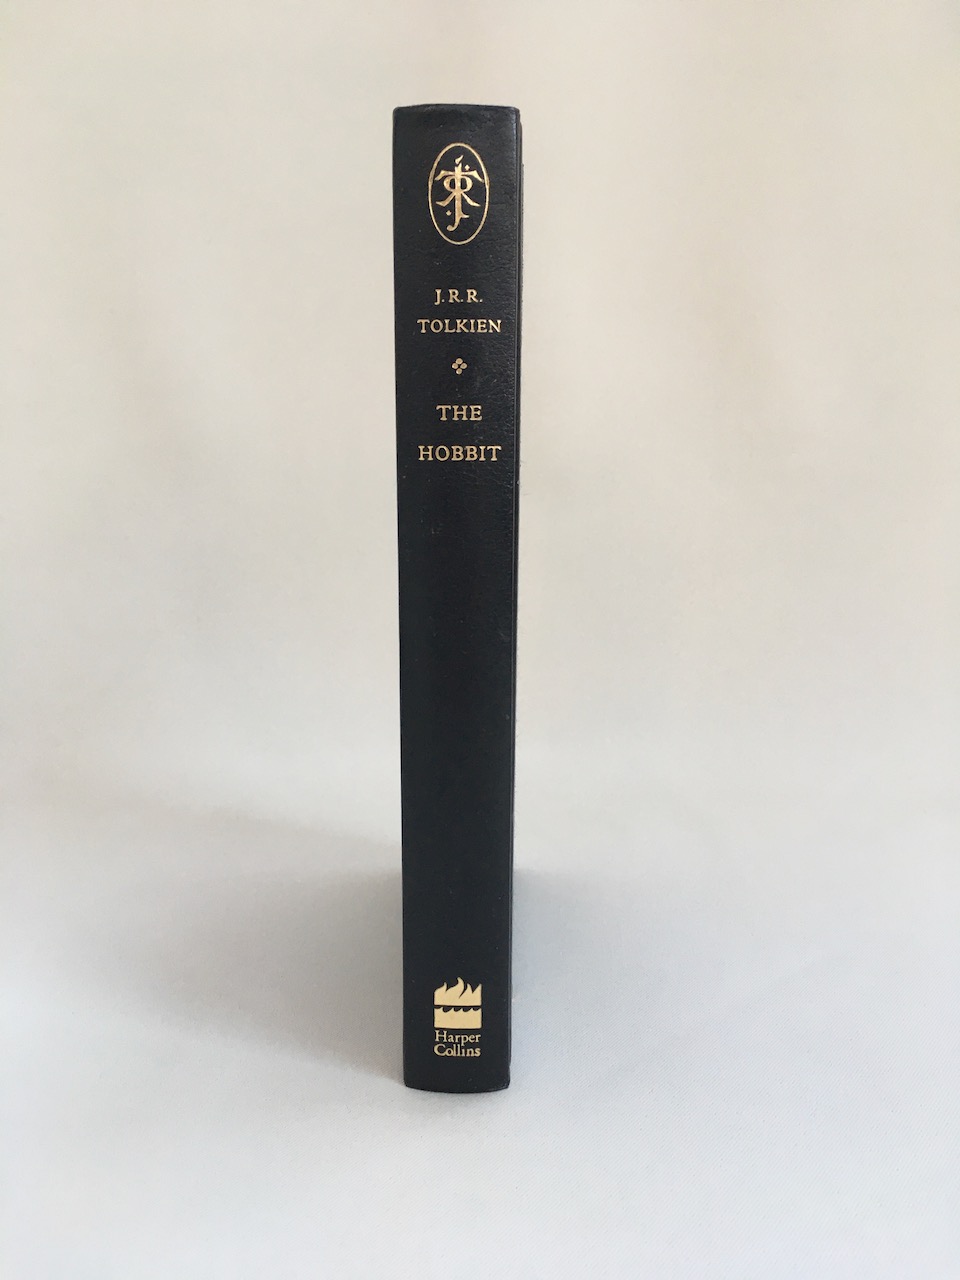 
 The Hobbit by J.R.R. Tolkien, 1999 Limited Edition, one of 2500 copies 12